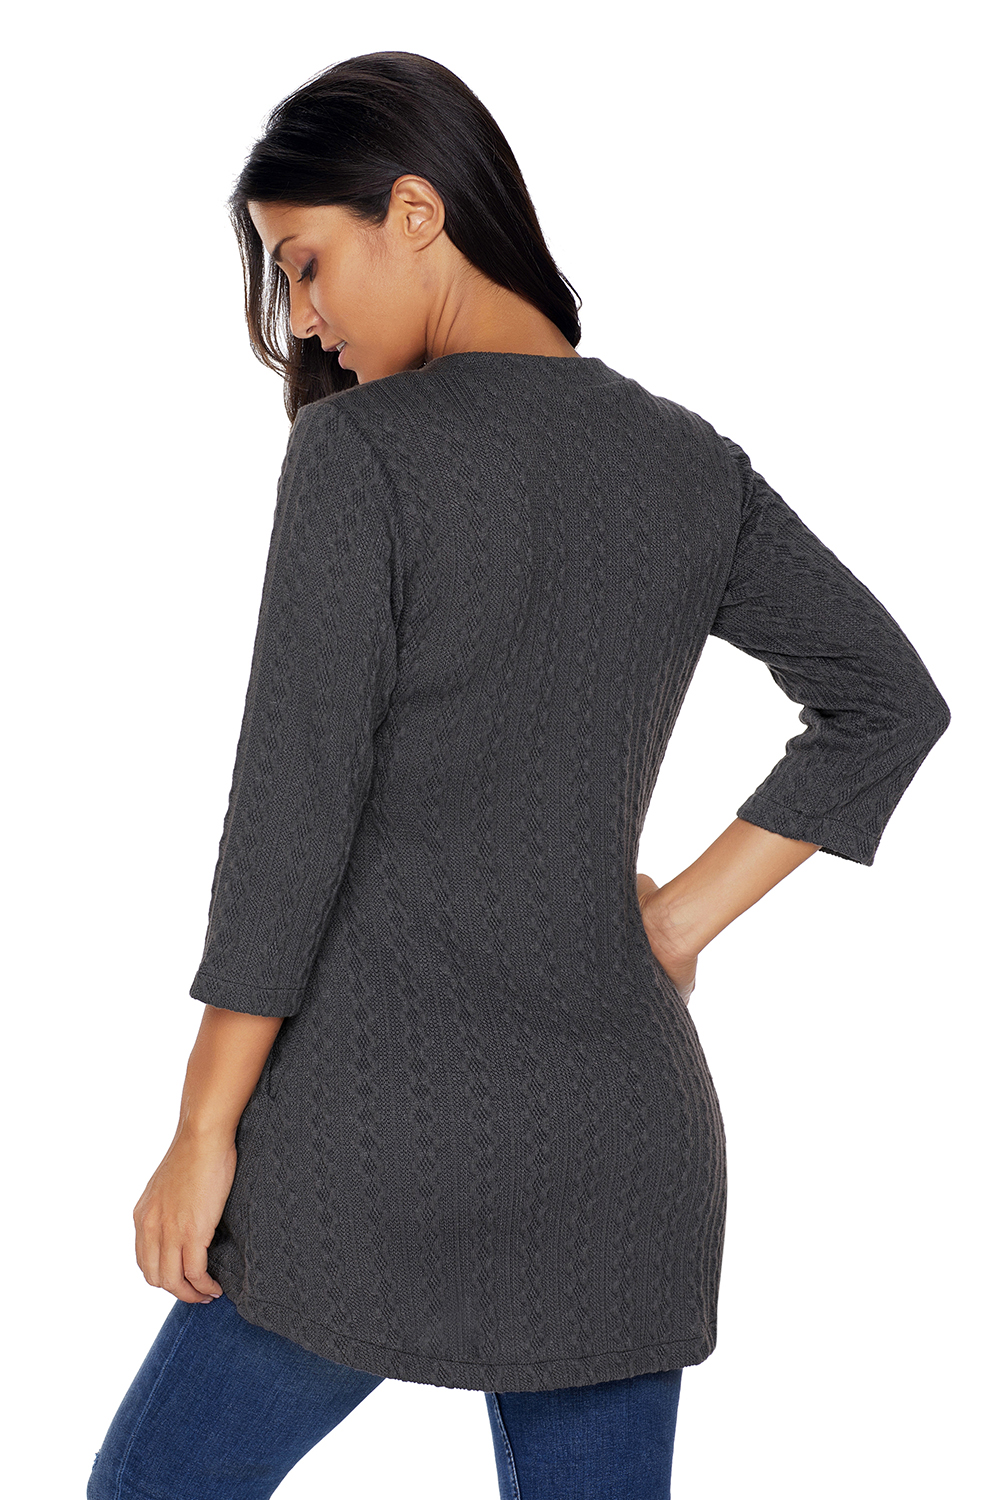 BY27750-1011 Charcoal Cable Knit Button Neck Swingy Tunic